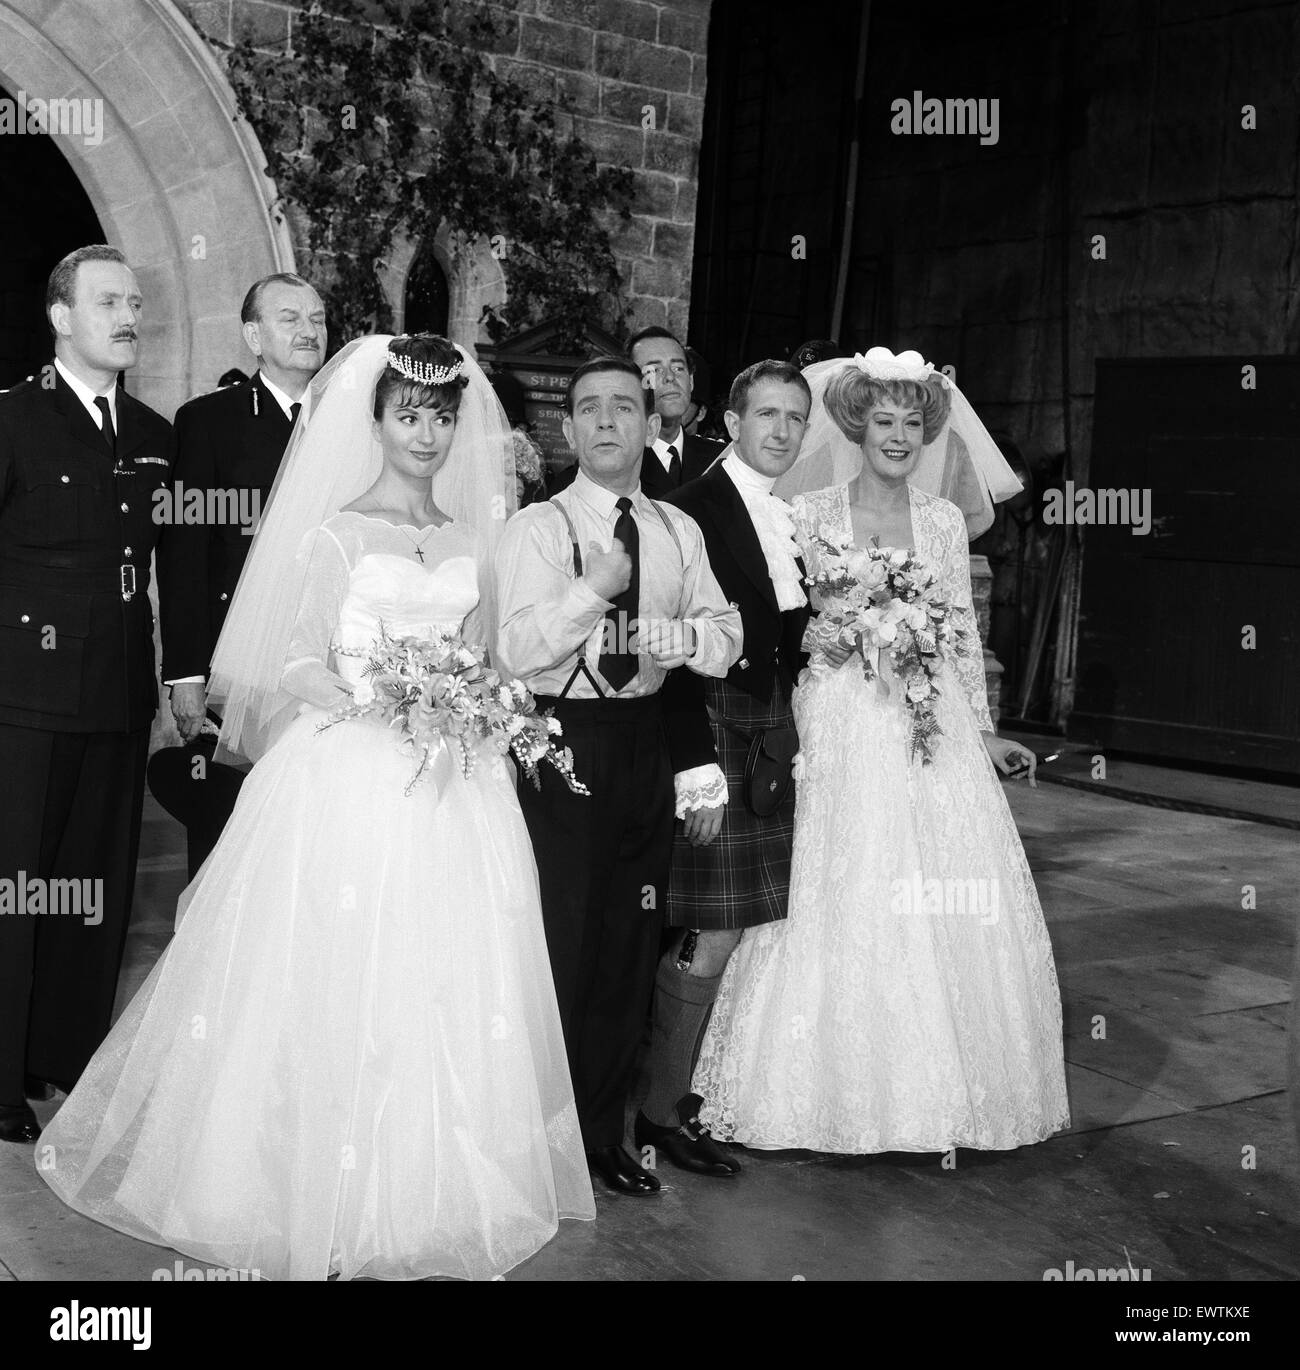 Norman Wisdom 'marries' film star Jennifer Jayne, at Pinewood Studios. It was a double wedding, alongside Ronnie Stevens and his bride Eleanor Summerfield, for their new film 'On the Beat'. 16th August 1962. Stock Photo